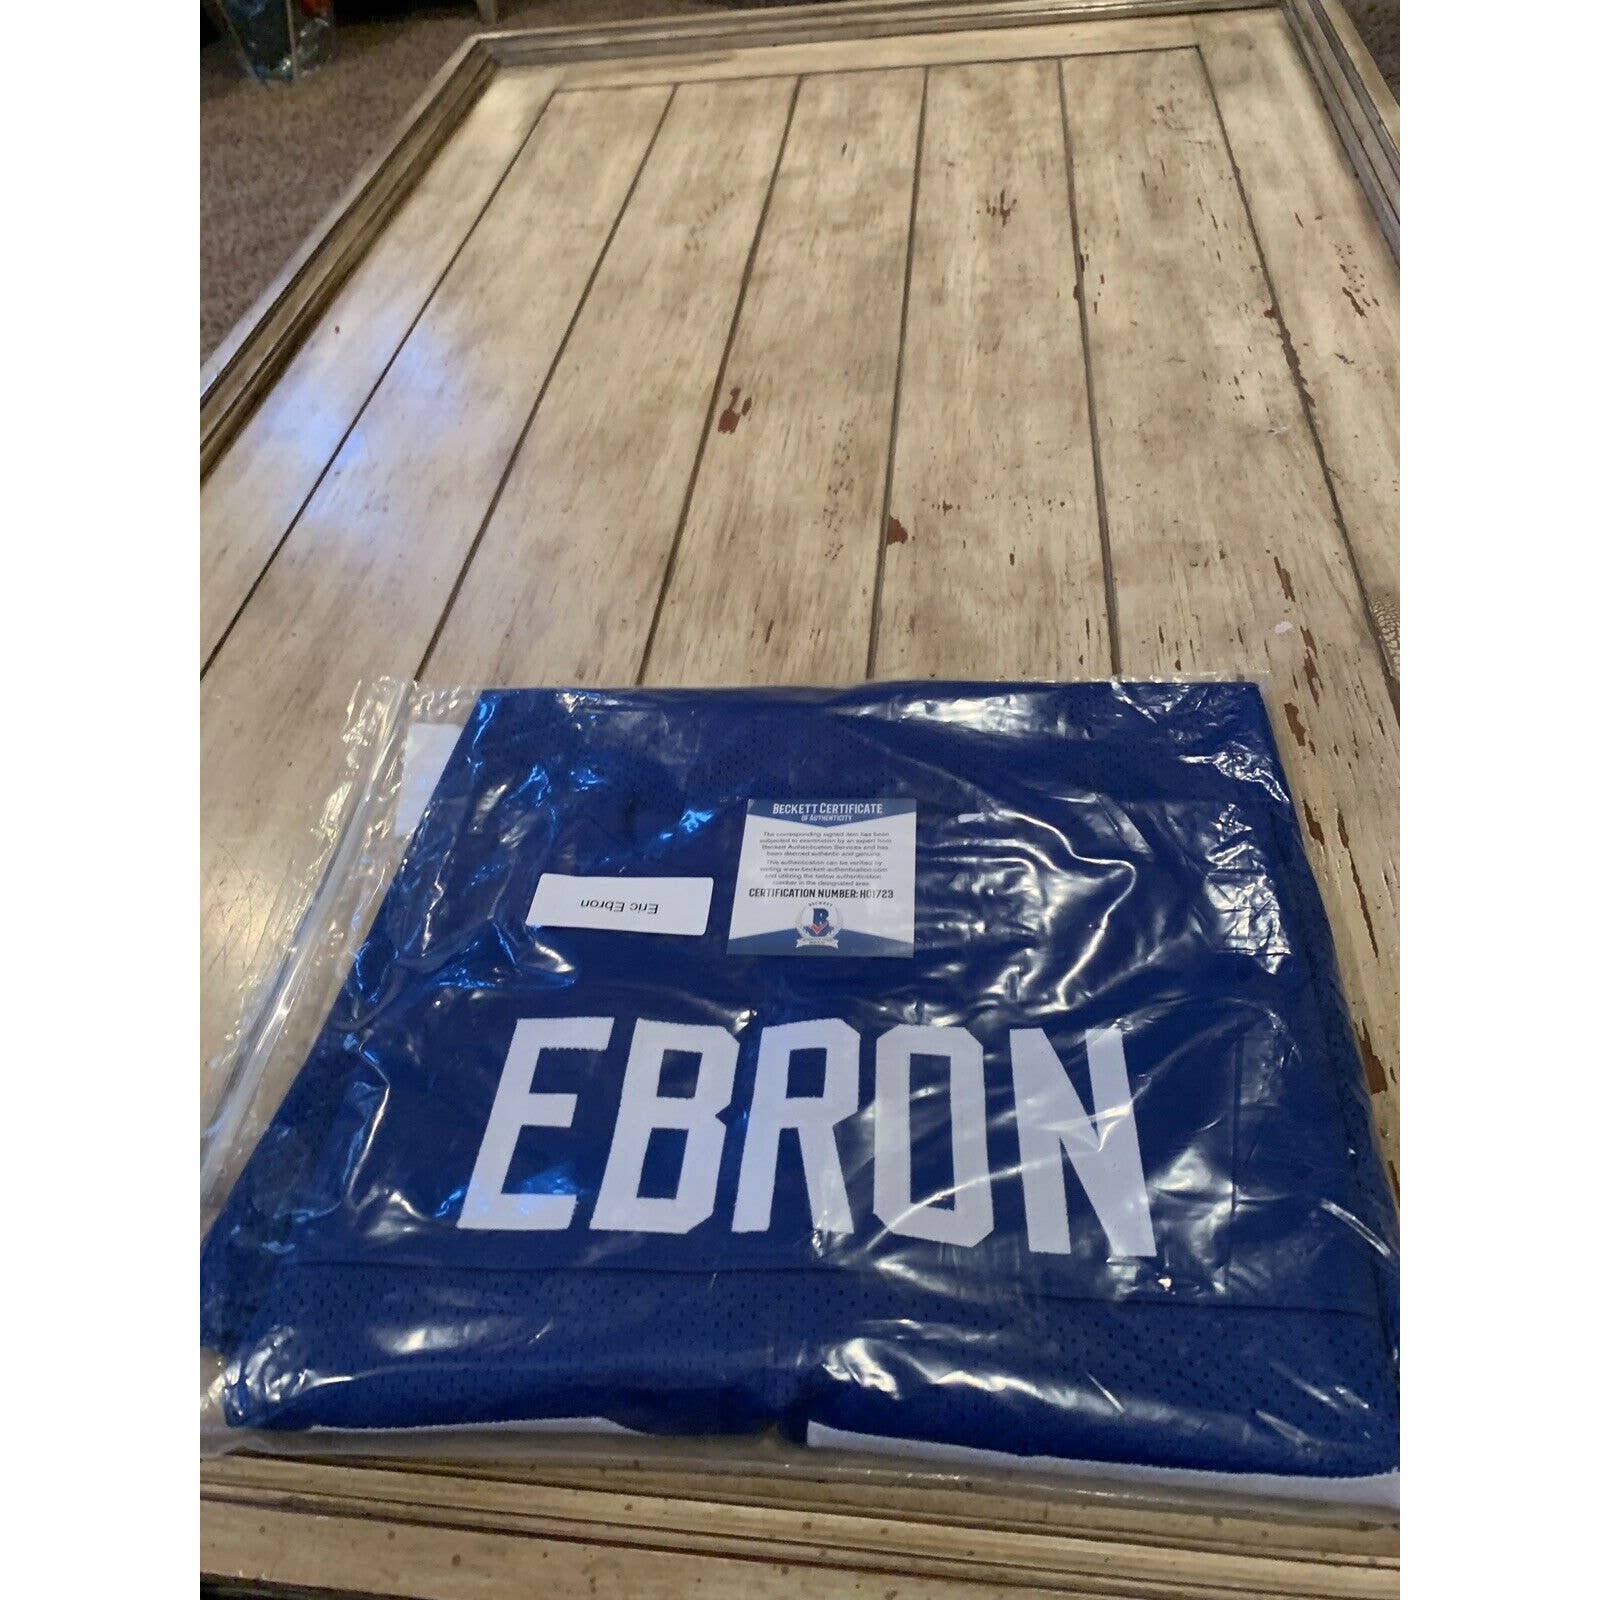 Eric Ebron Autographed/Signed Jersey Beckett COA Indianapolis Colts - TreasuresEvolved